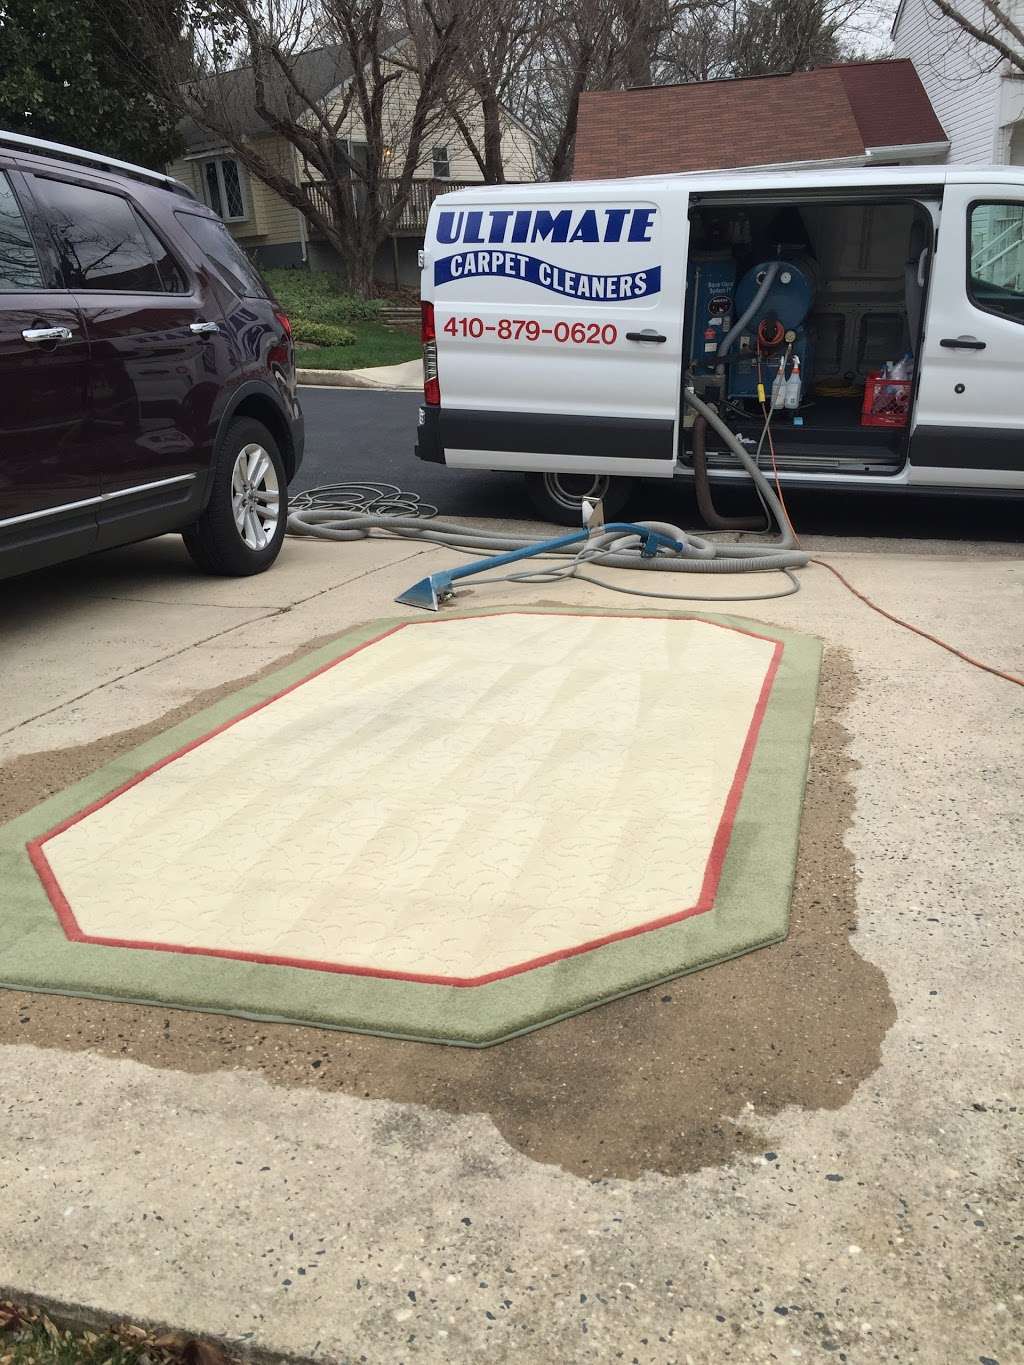 Ultimate Carpet Cleaners | 900 Charlyn Ct, Bel Air, MD 21014 | Phone: (410) 879-0620